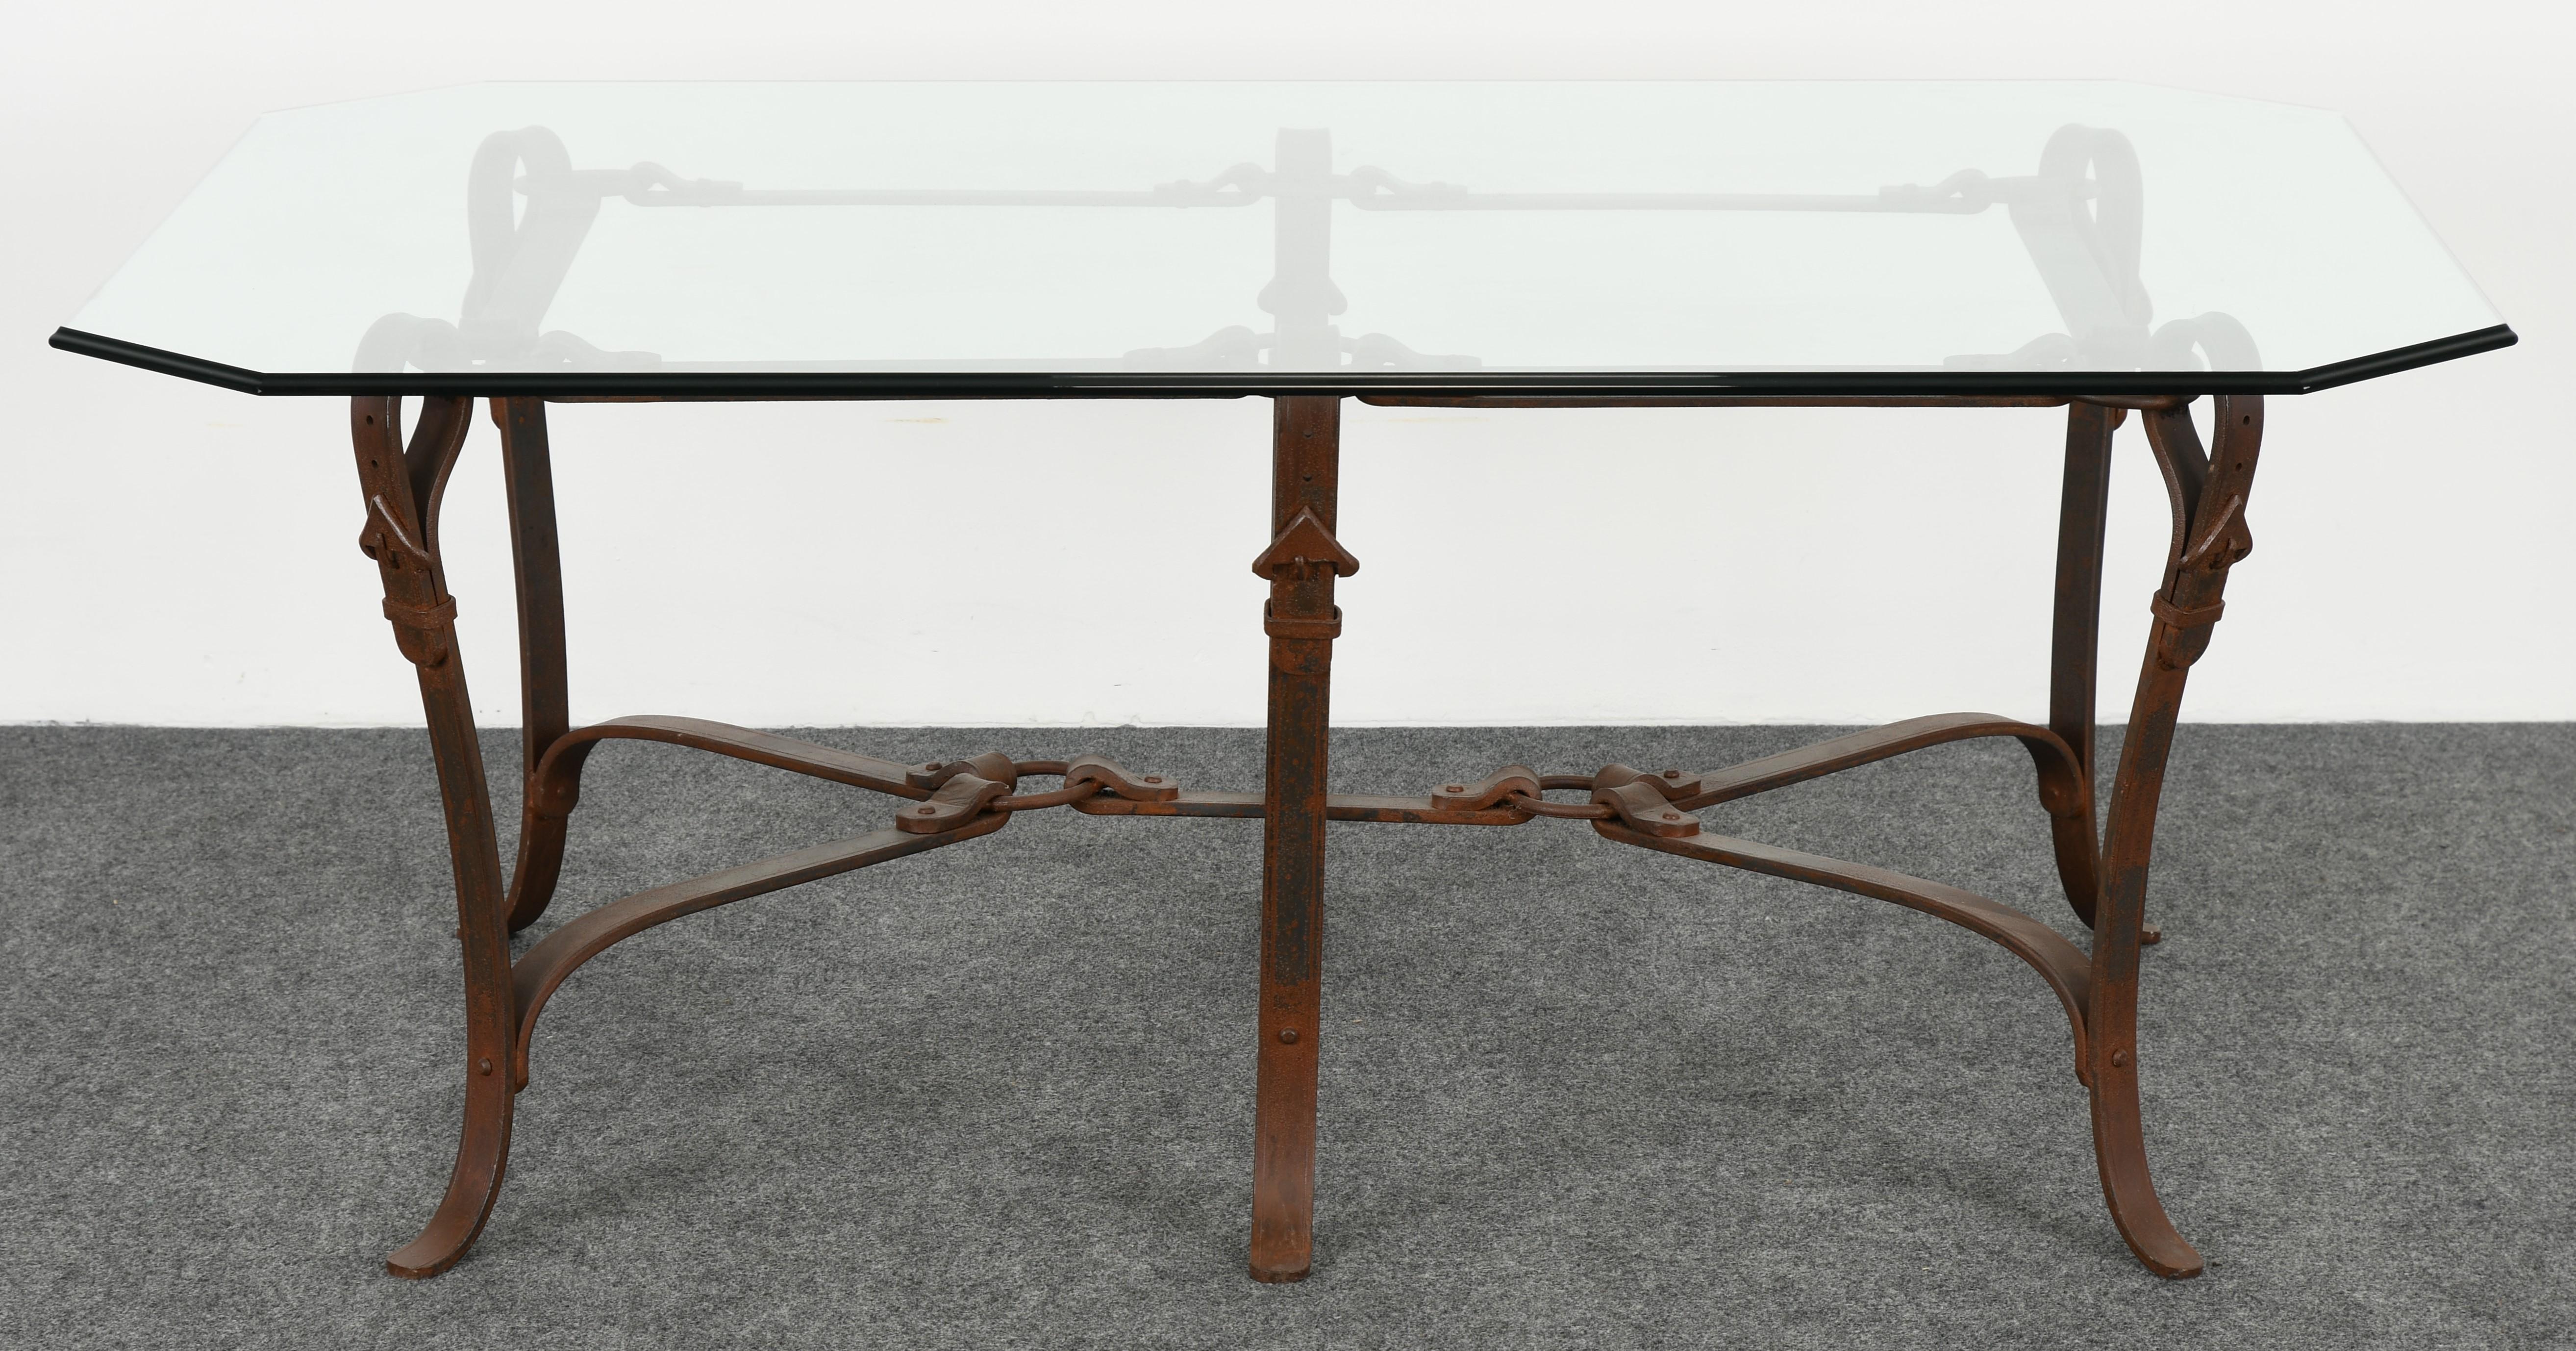 Bridle strap coffee table in the manner of Hermes made of wrought iron with original rust patinated finish. Glass has some minor scratches, however, not distracting.

Dimensions: 23.75